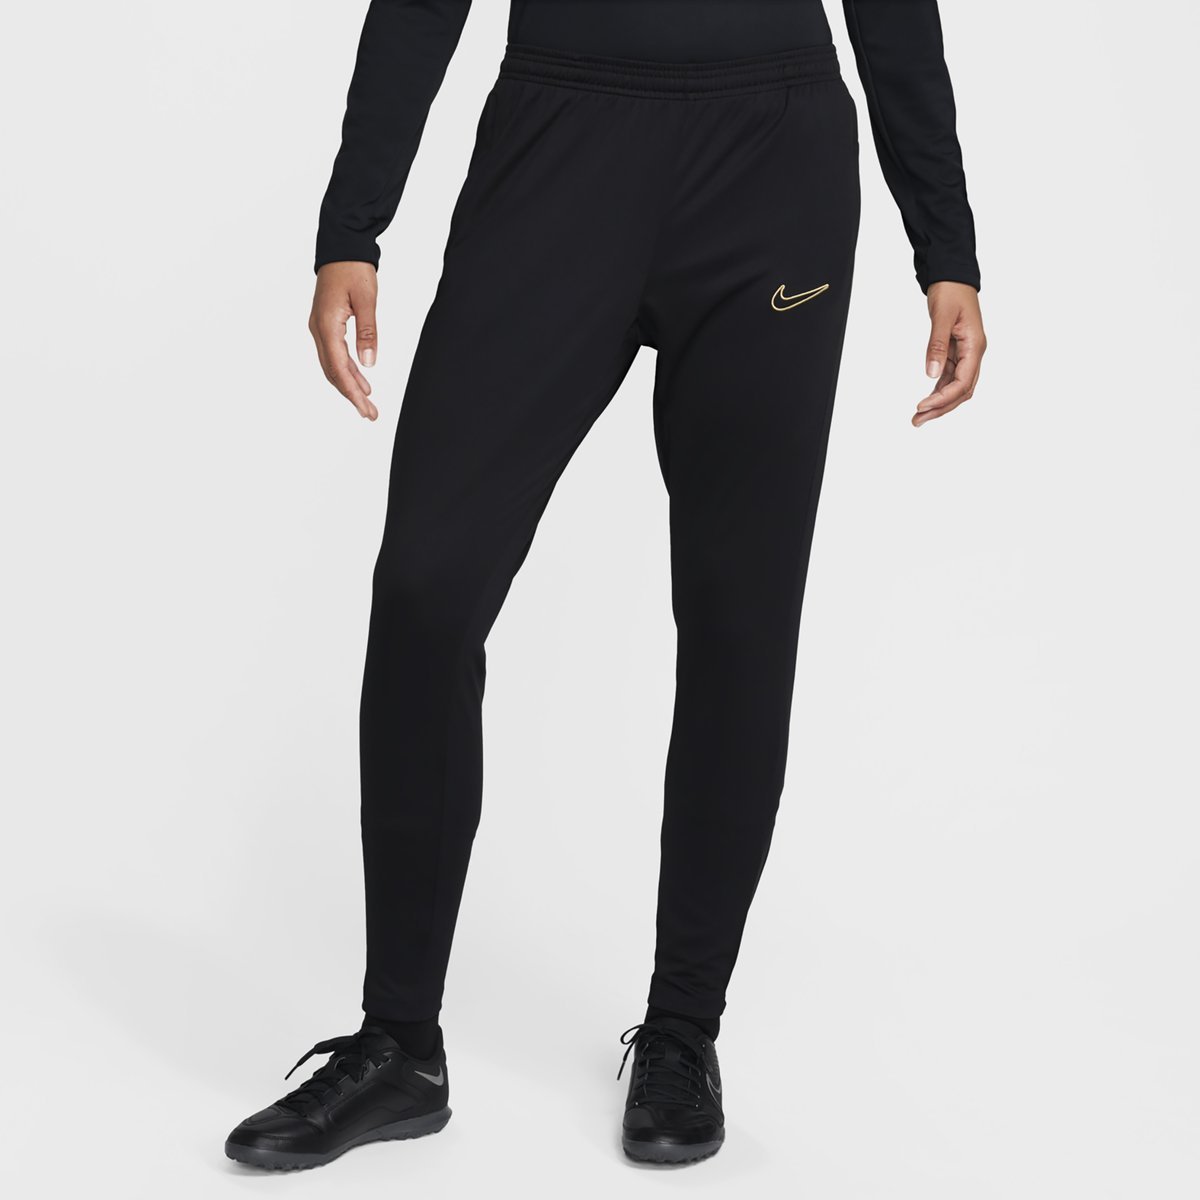 ON RUNNING Track Pants Women | Runners' lab webshop